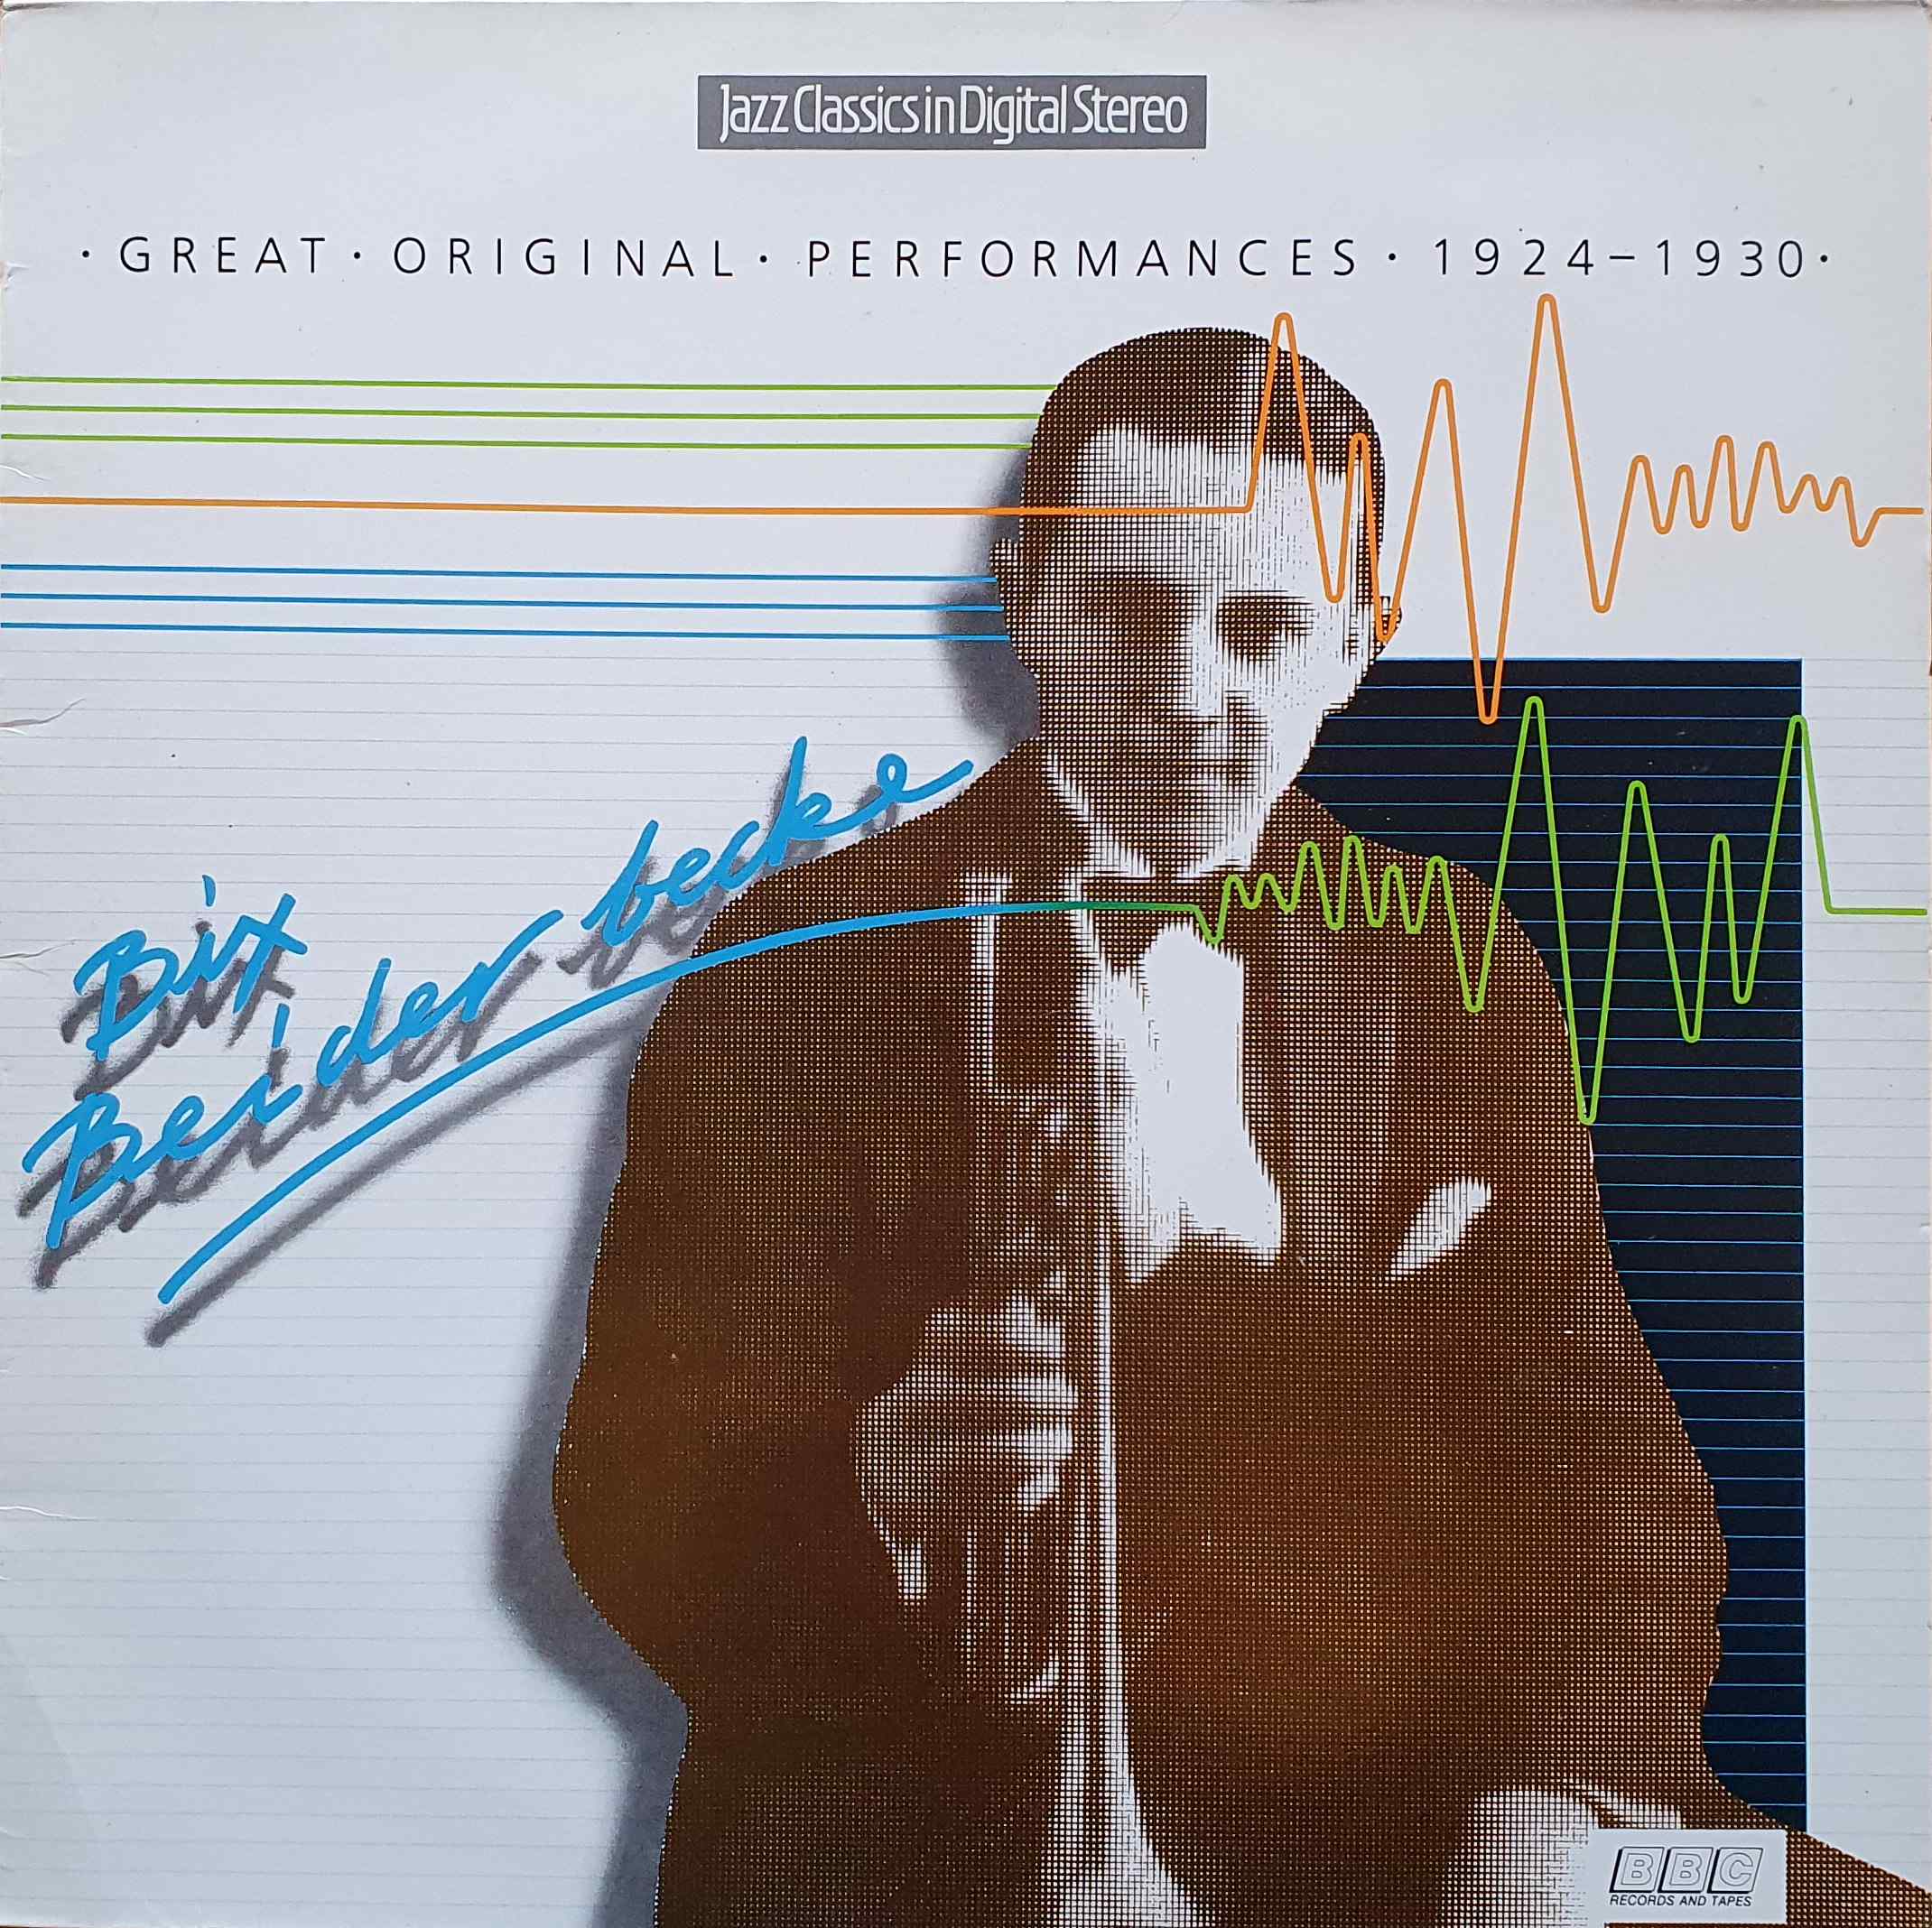 Picture of REB 601 Jazz Classics - Bix Beiderbecke by artist Bix Beiderbecke from the BBC albums - Records and Tapes library